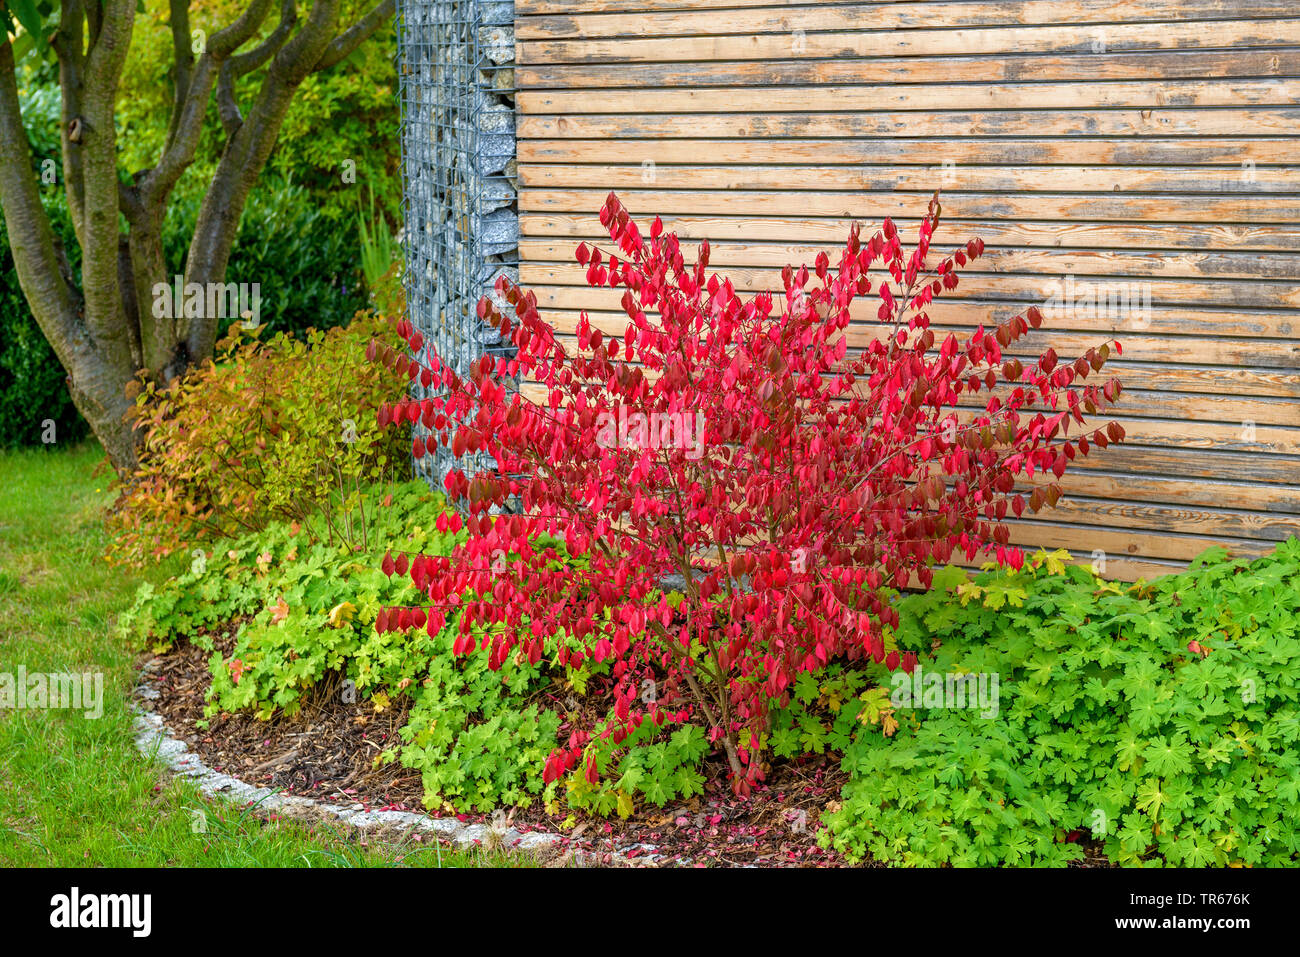 winged burning bush,wahoo, winged euonymus, winged spindle-tree (Euonymus alatus 'Compactus', Euonymus alatus Compactus, Euonymus alata, Euonymus alatus), cultivar Compactus in autumn Stock Photo